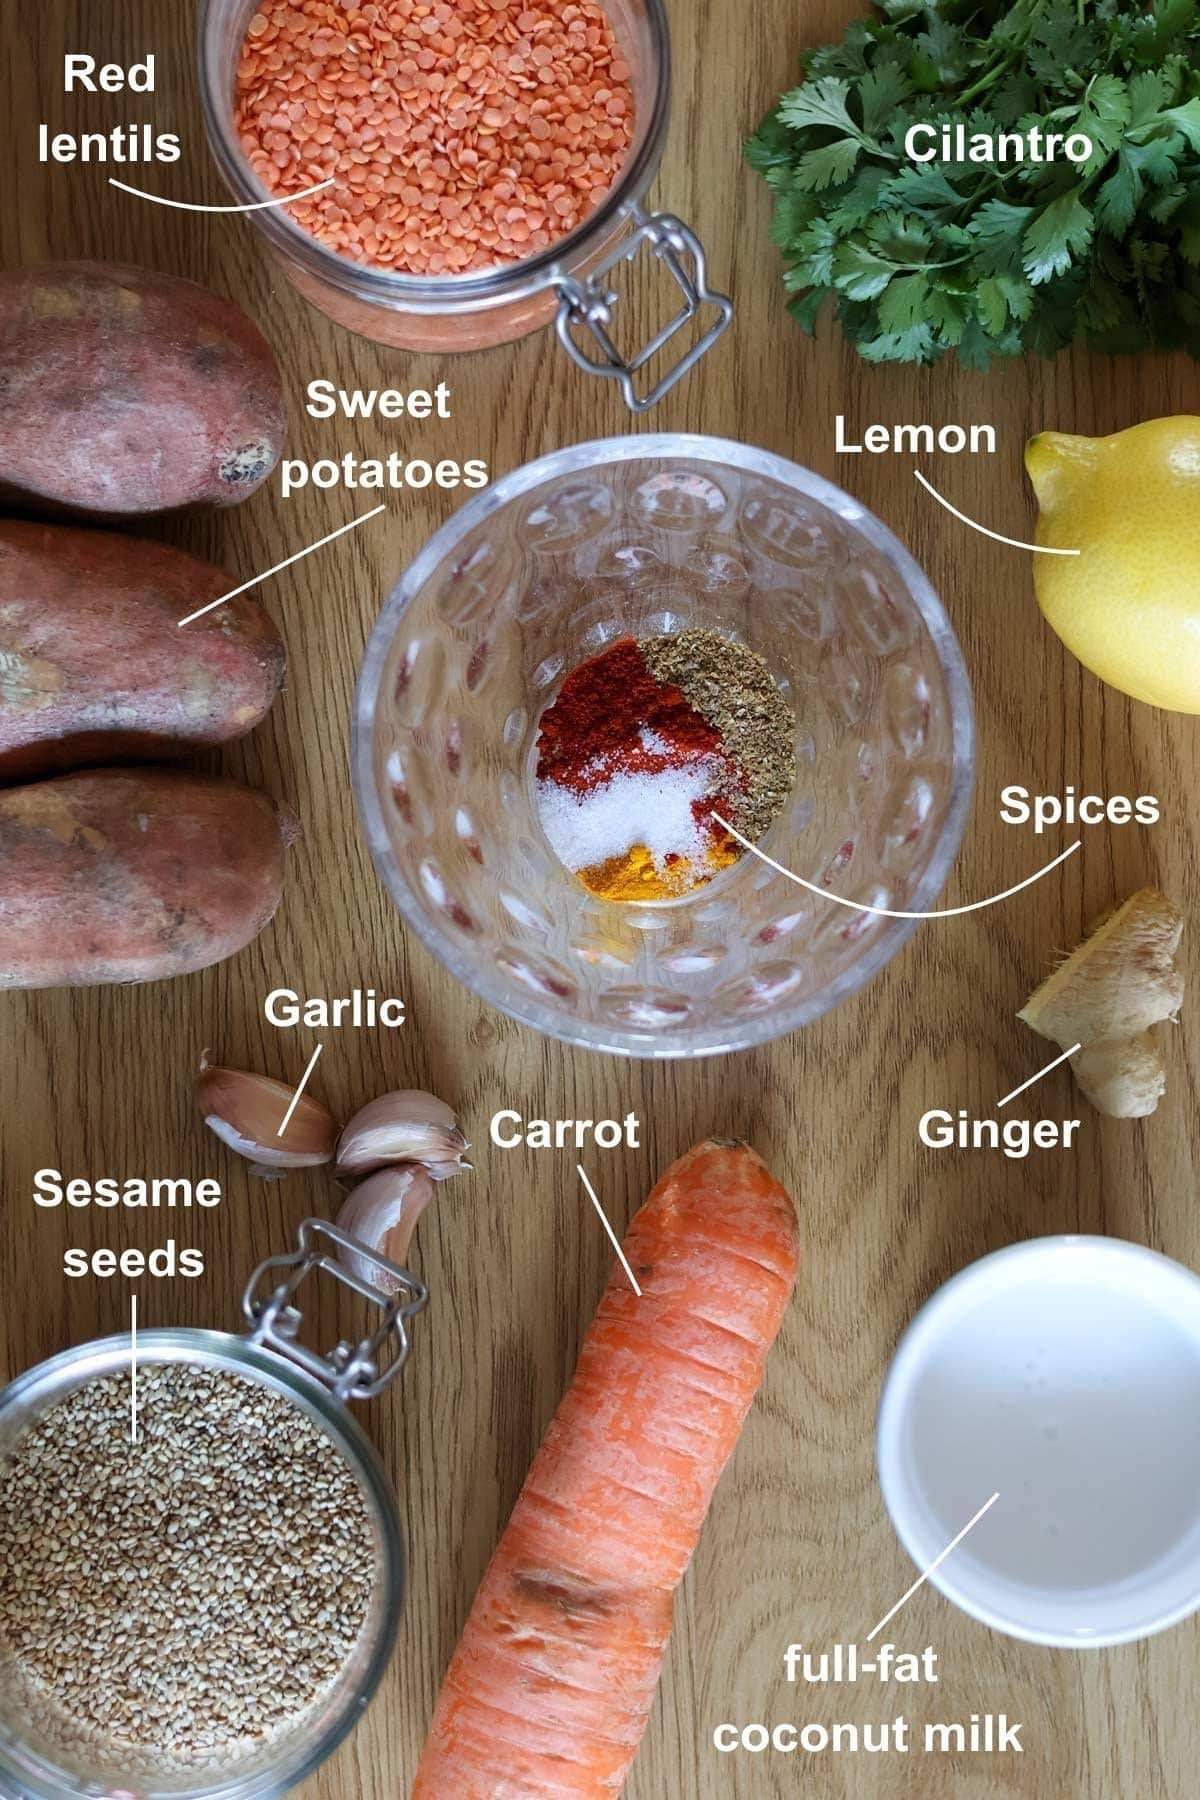 All the ingredients for the carrot sweet potato and ginger soup on a wooden table.